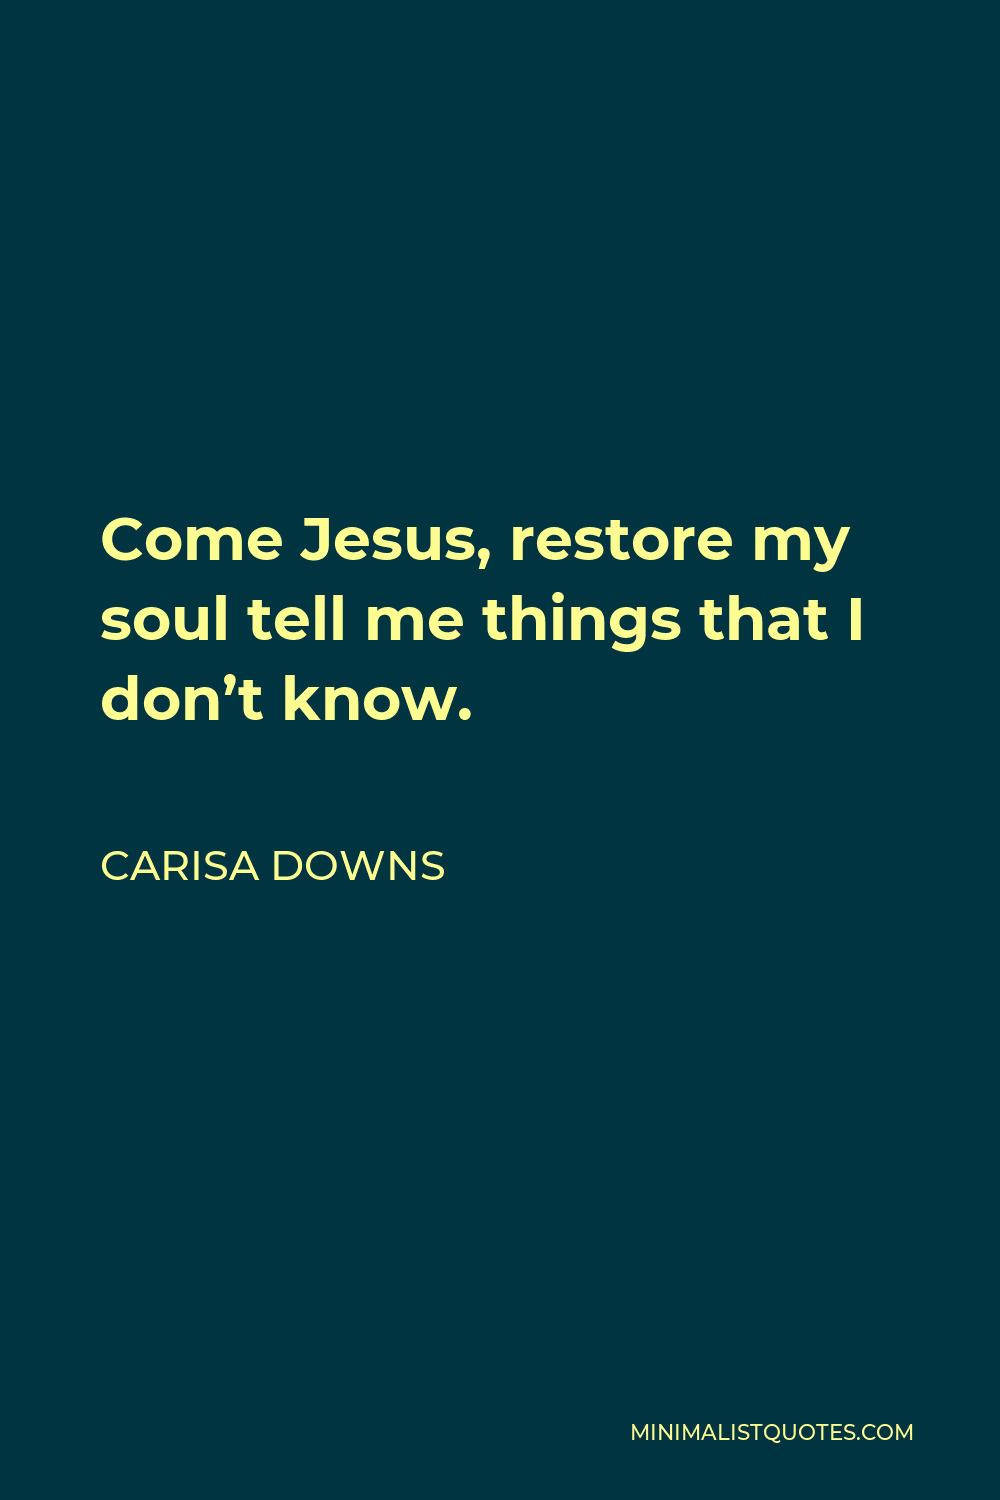 Carisa Downs Quote - Come Jesus, restore my soul tell me things that I don’t know.